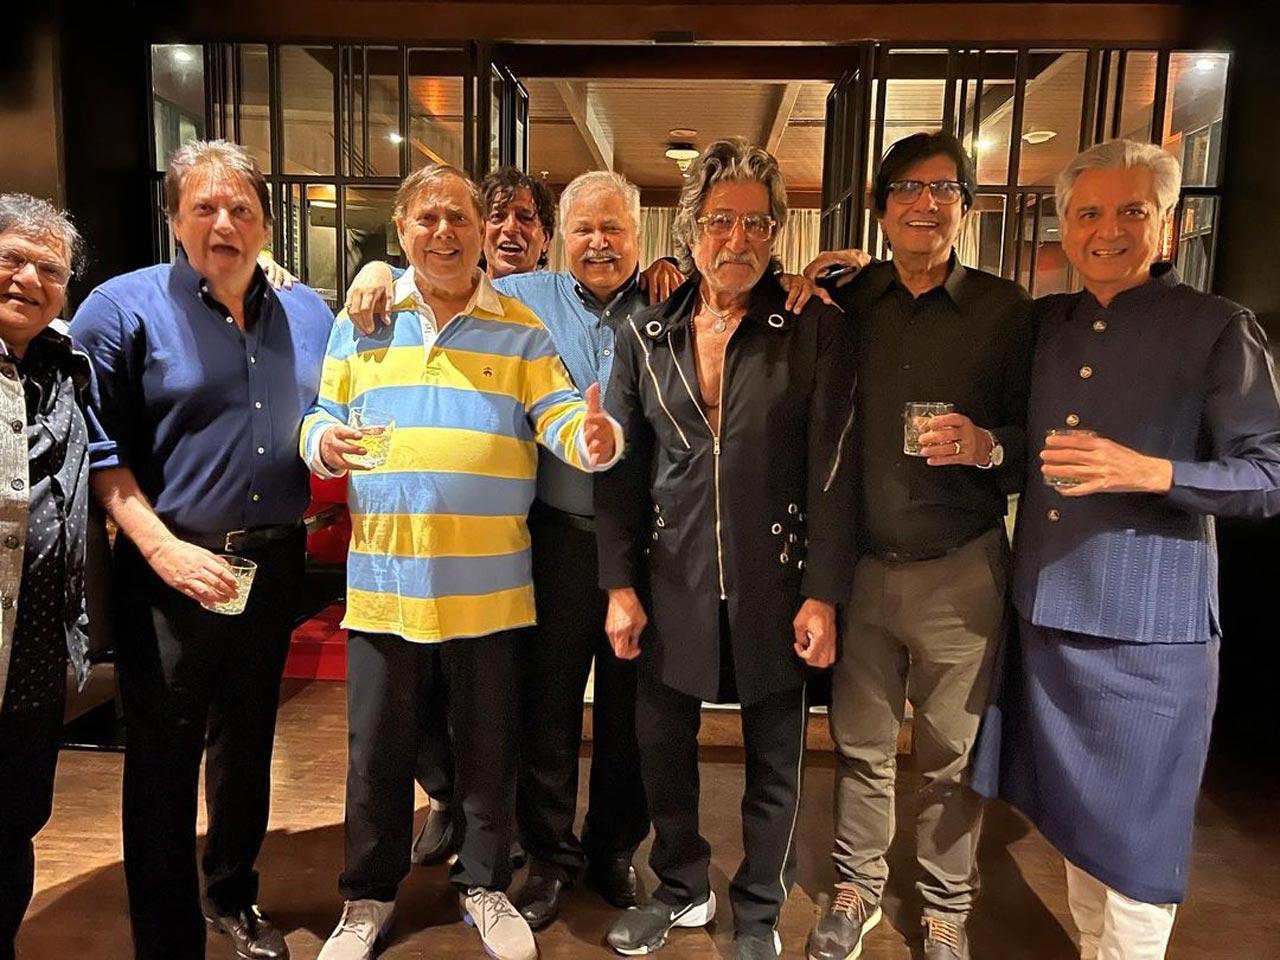 Actor Chunky Pandey can be seen joining the legendary actors. All of them could be seen donning black outfits for the big birthday bash